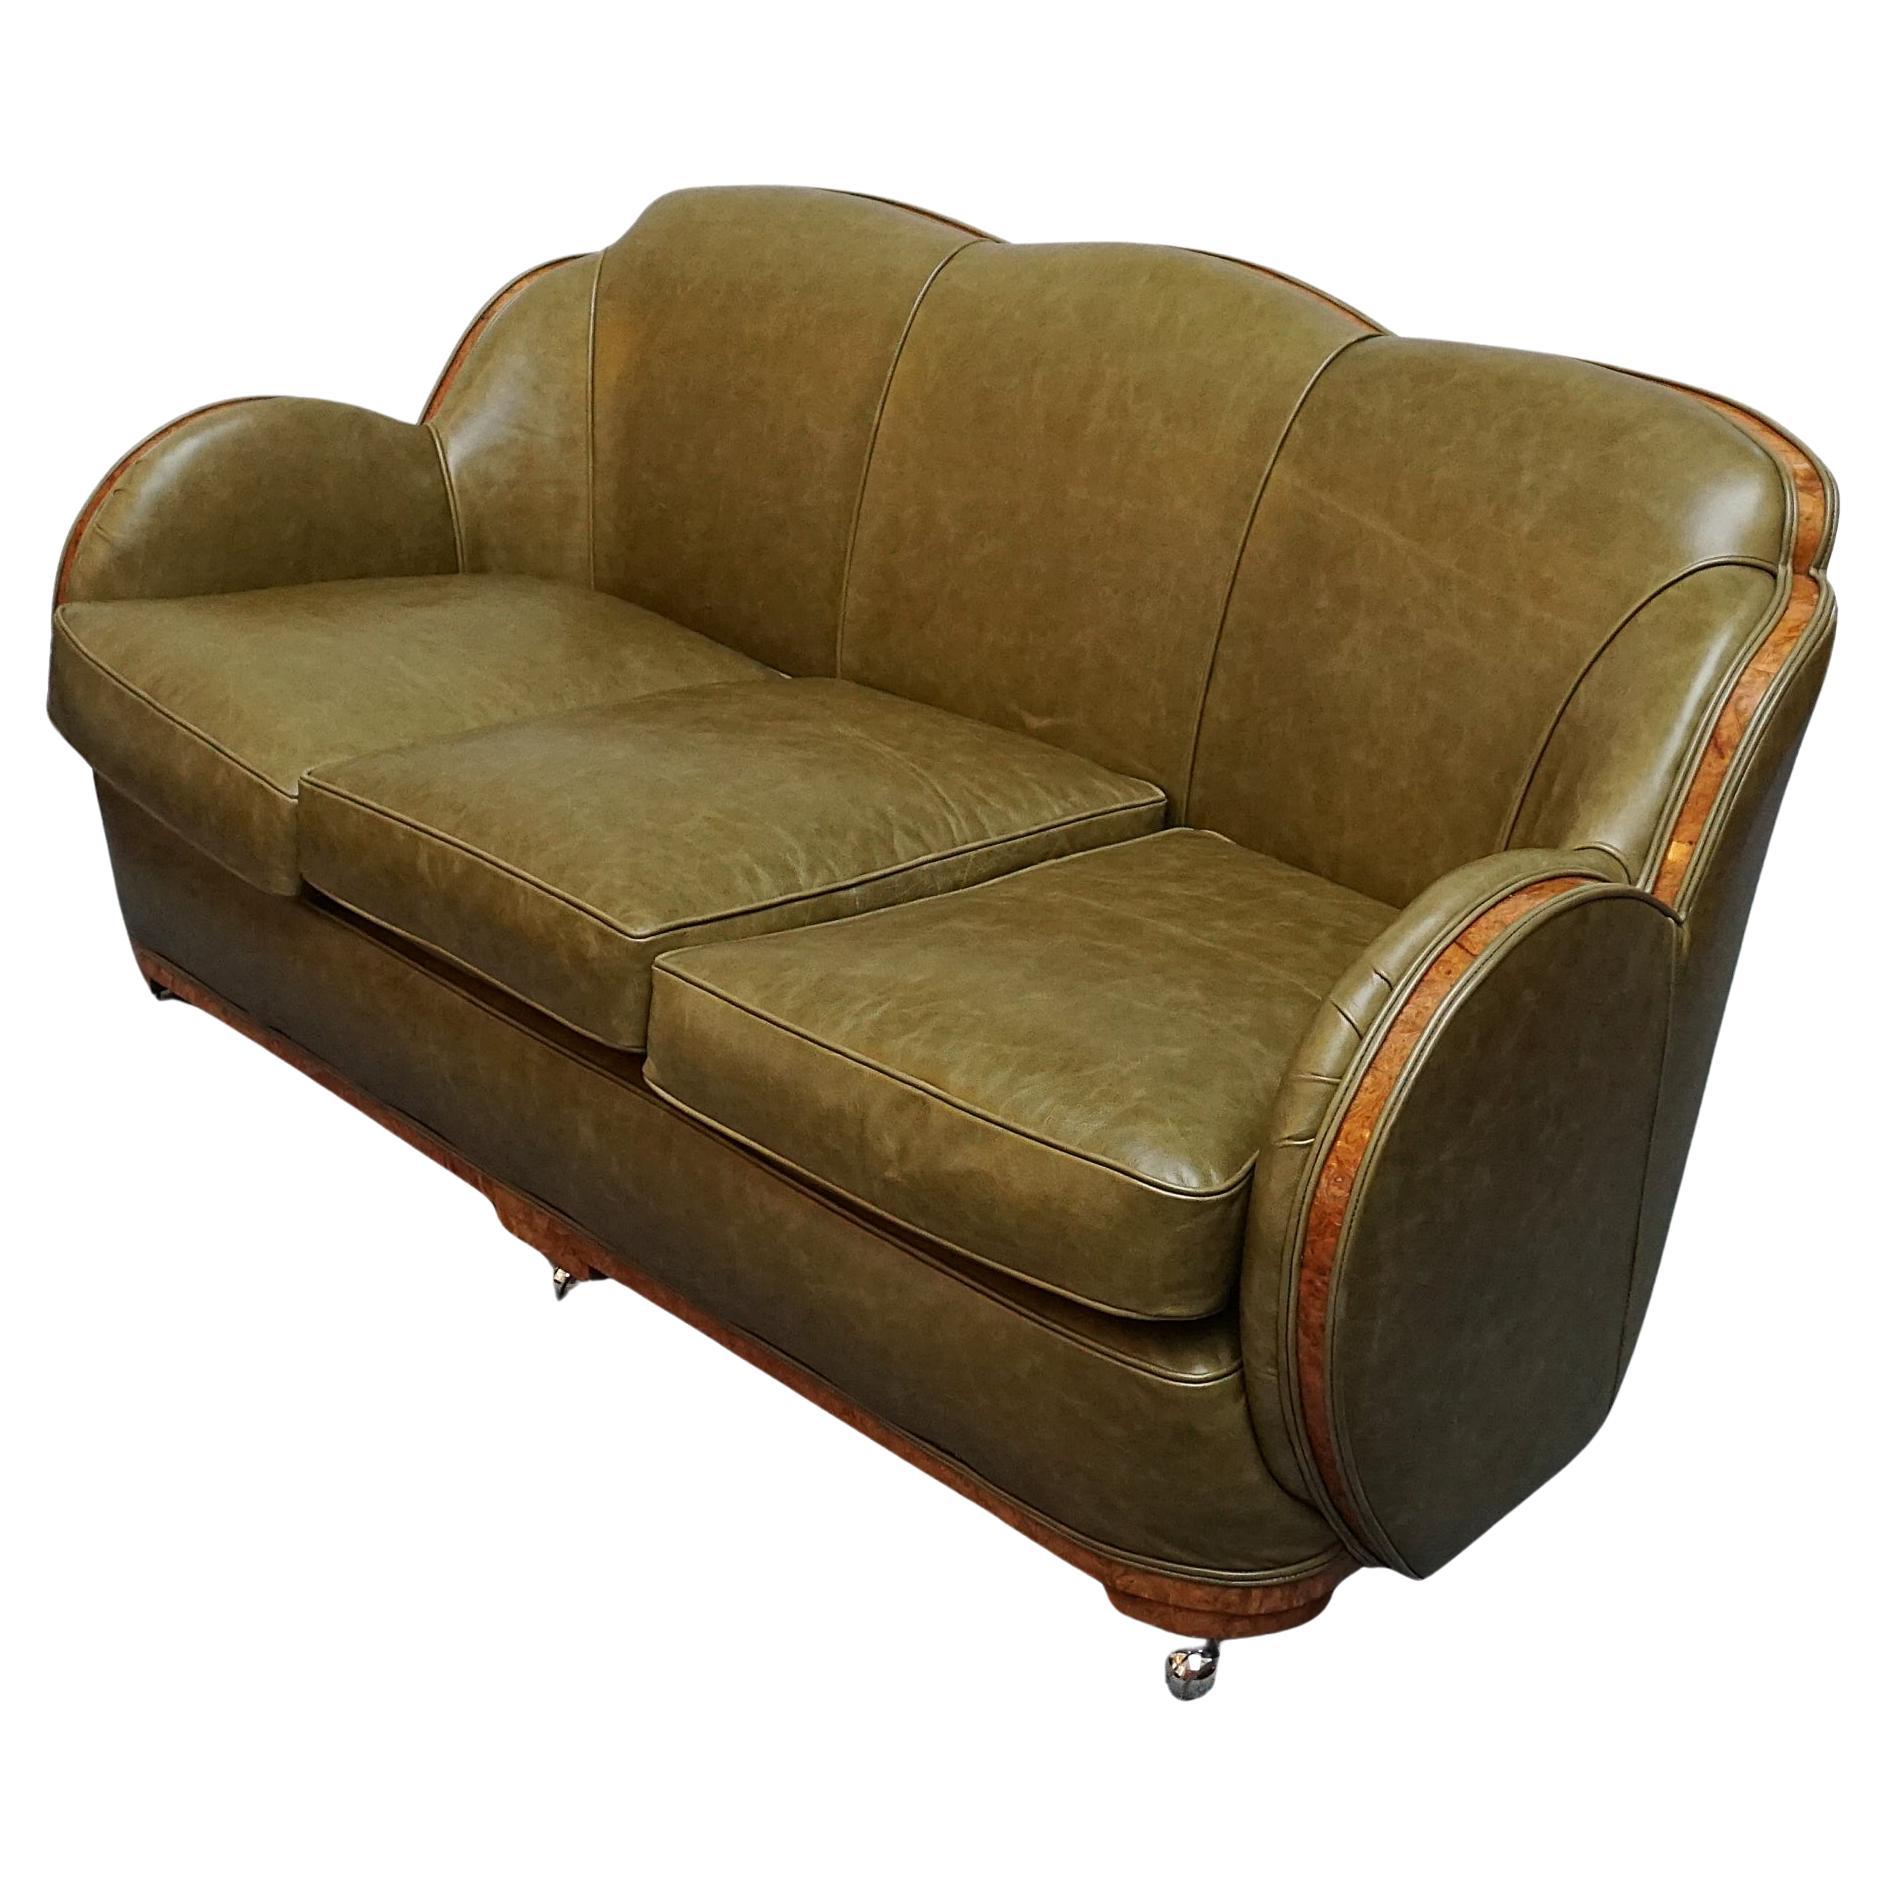 English Art Deco Cloud Sofa by Harry & Lou Epstein Upholstered in Green Leather  For Sale